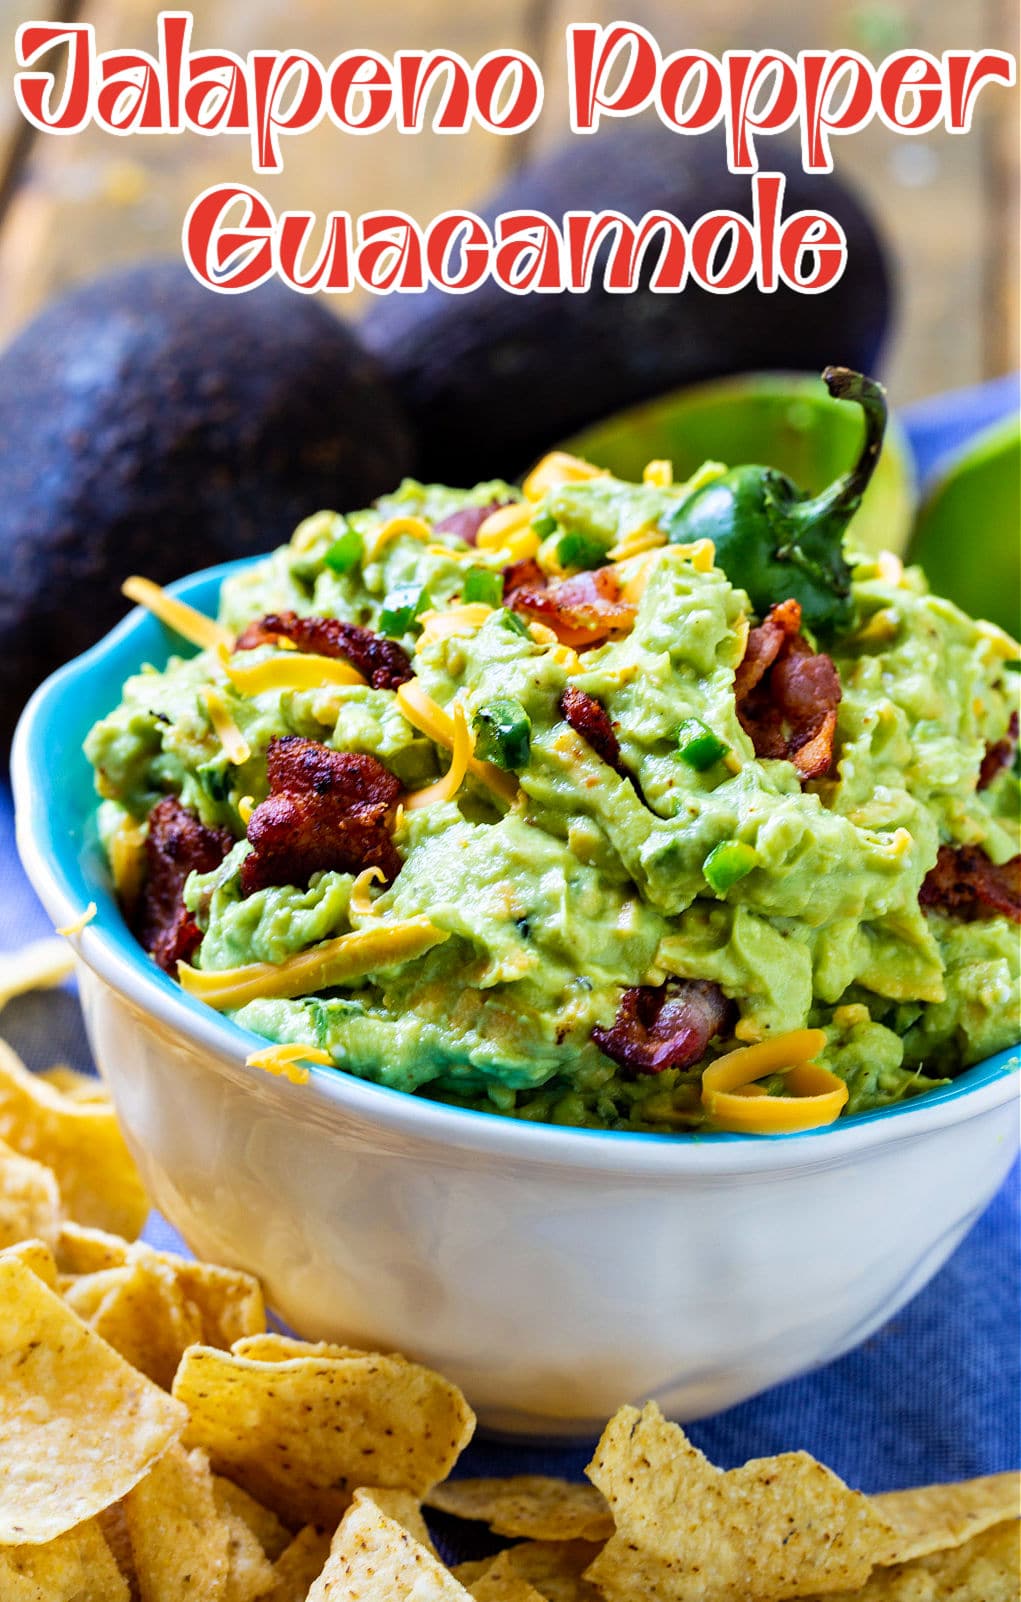 Jalapeno Popper Guacamole in a bowl surrounded by chips.